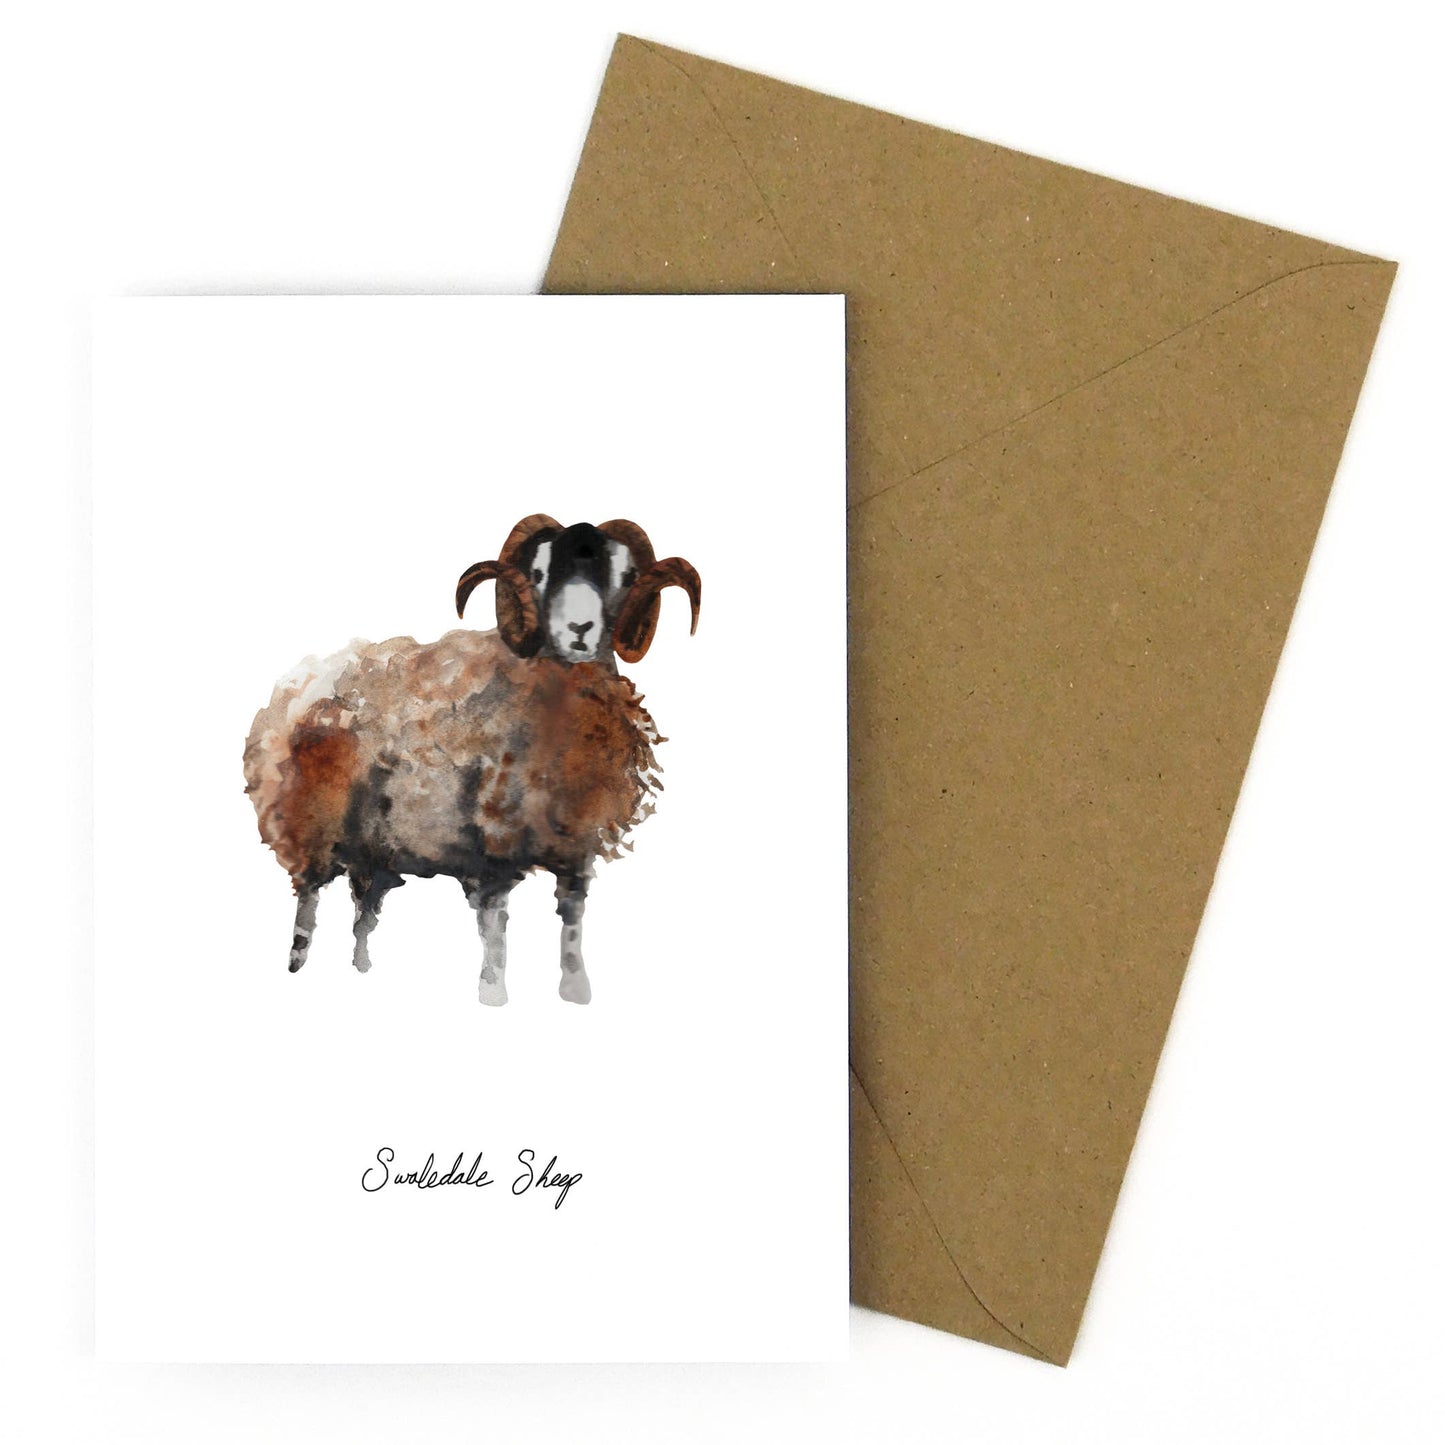 Swaledale Sheep Greetings Card by Also the Bison